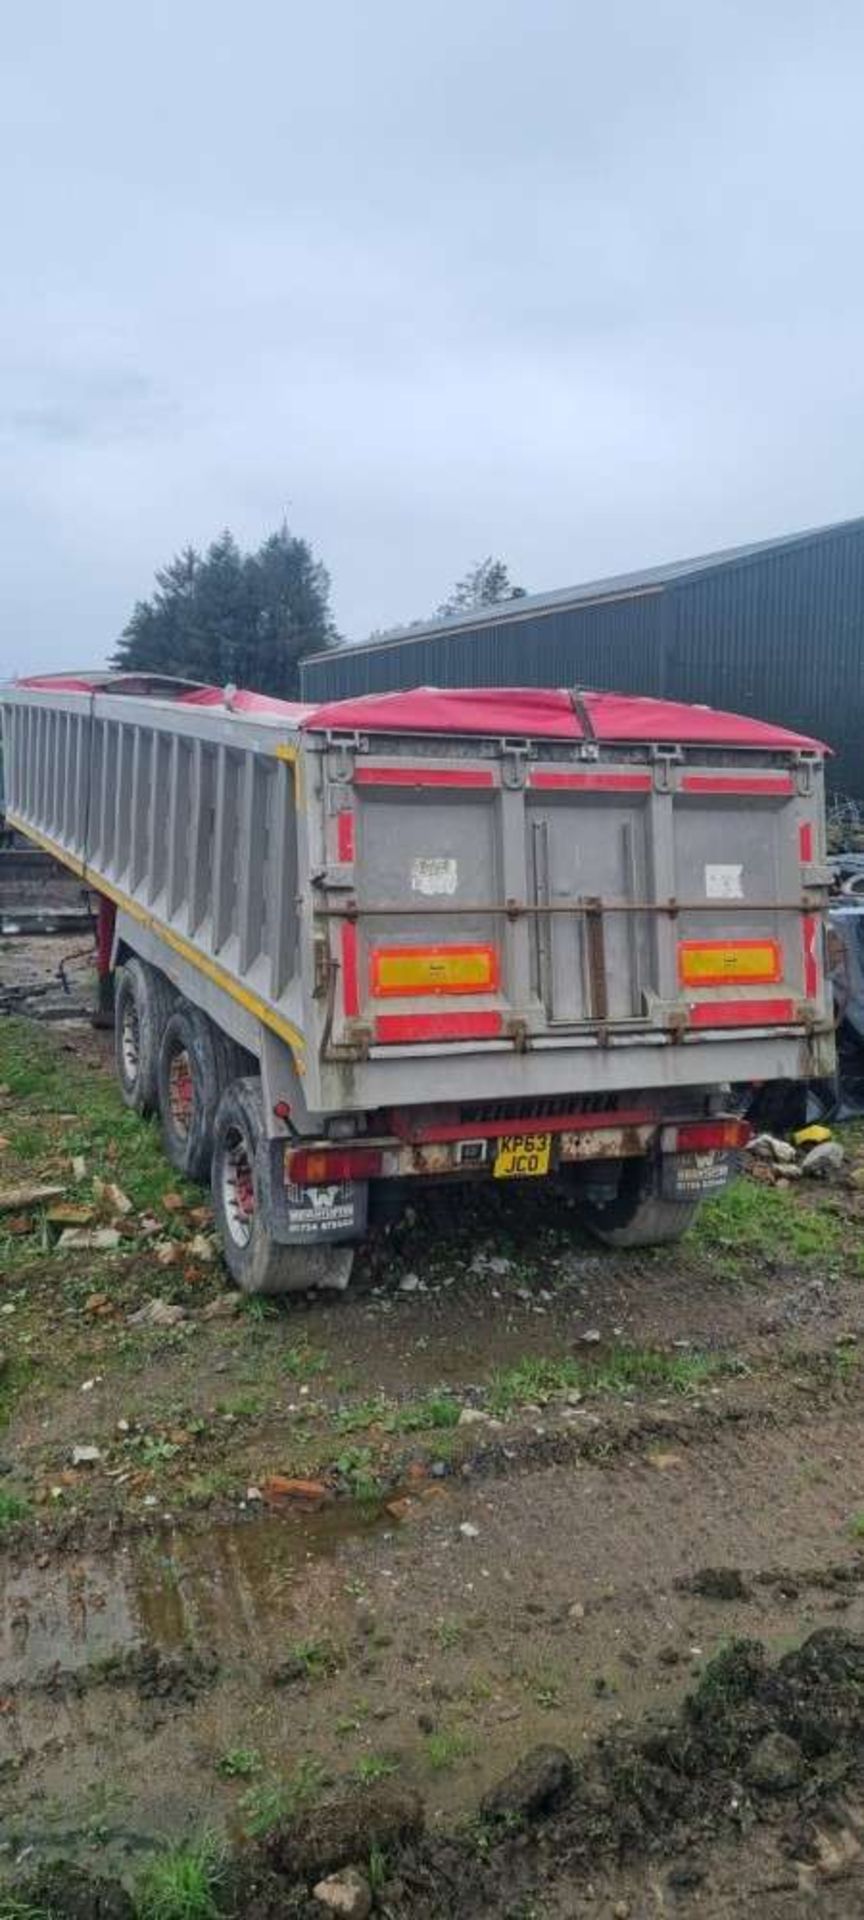 2005 Weightlifter 3 Axle Tipper Trailer (Sold on Site - Location Slaidburn) - Image 4 of 6